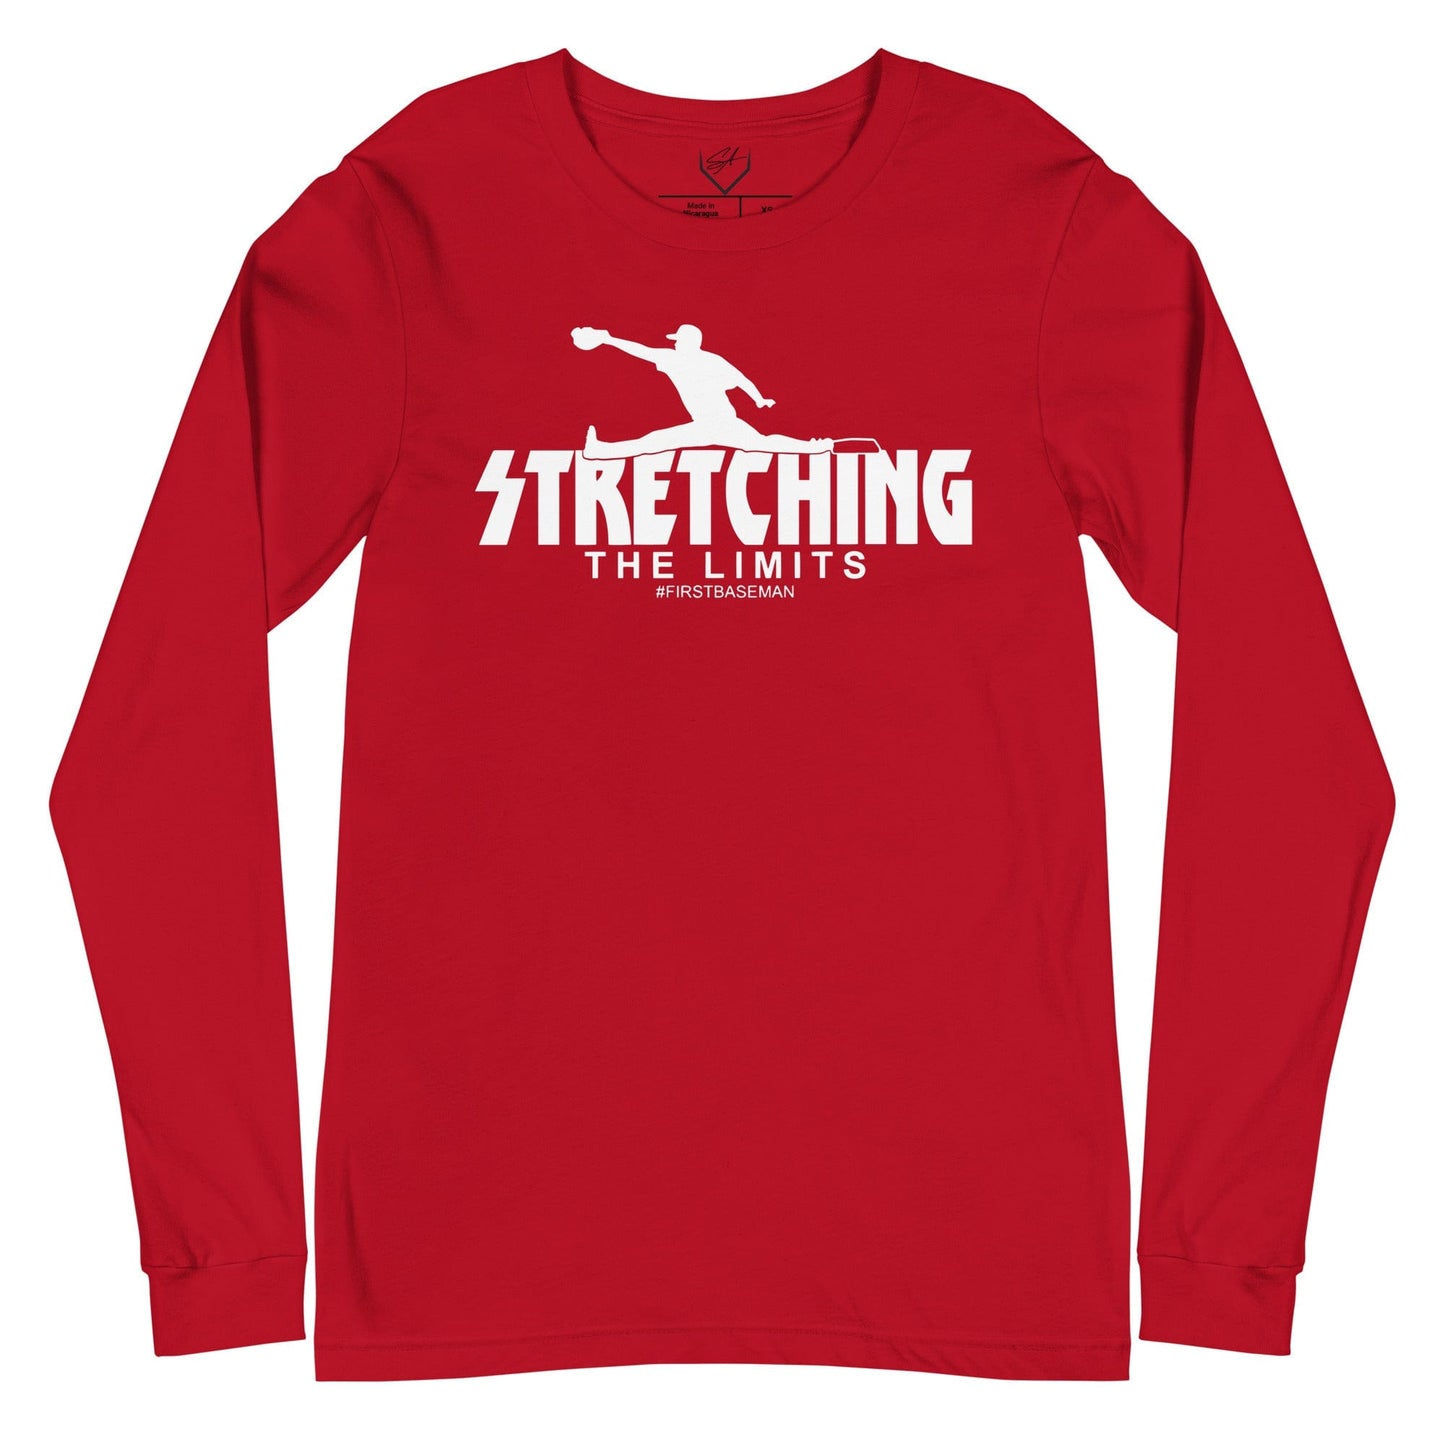 Stretching The Limits - Adult Long Sleeve